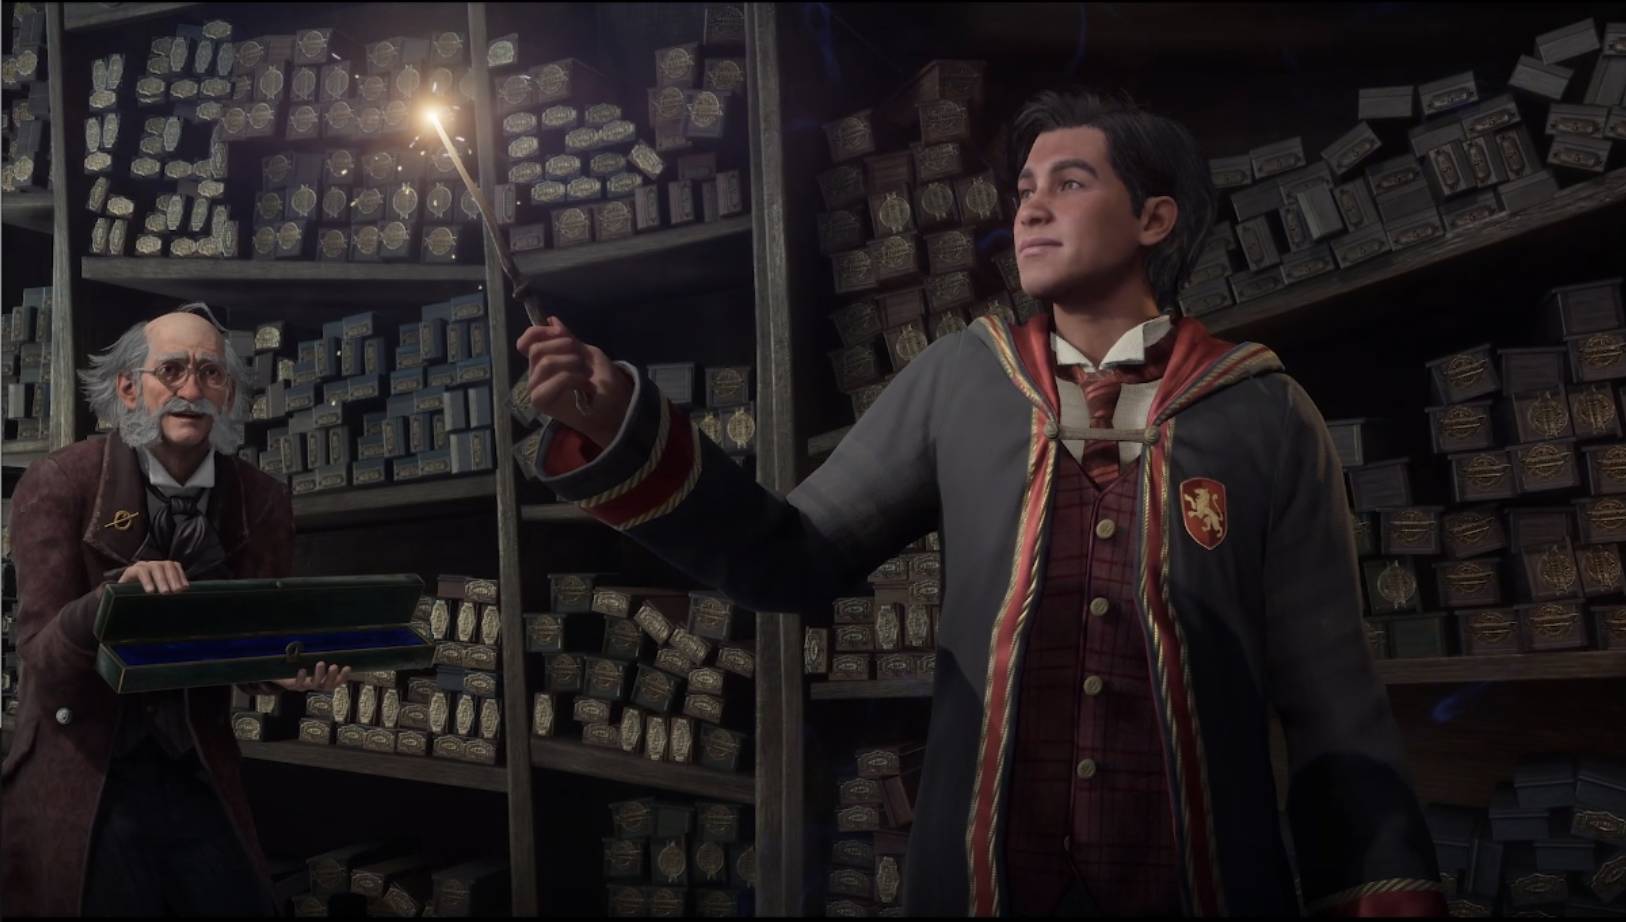 Hogwarts Legacy: A Guide to Solving Hogwarts' Puzzles — Poggers